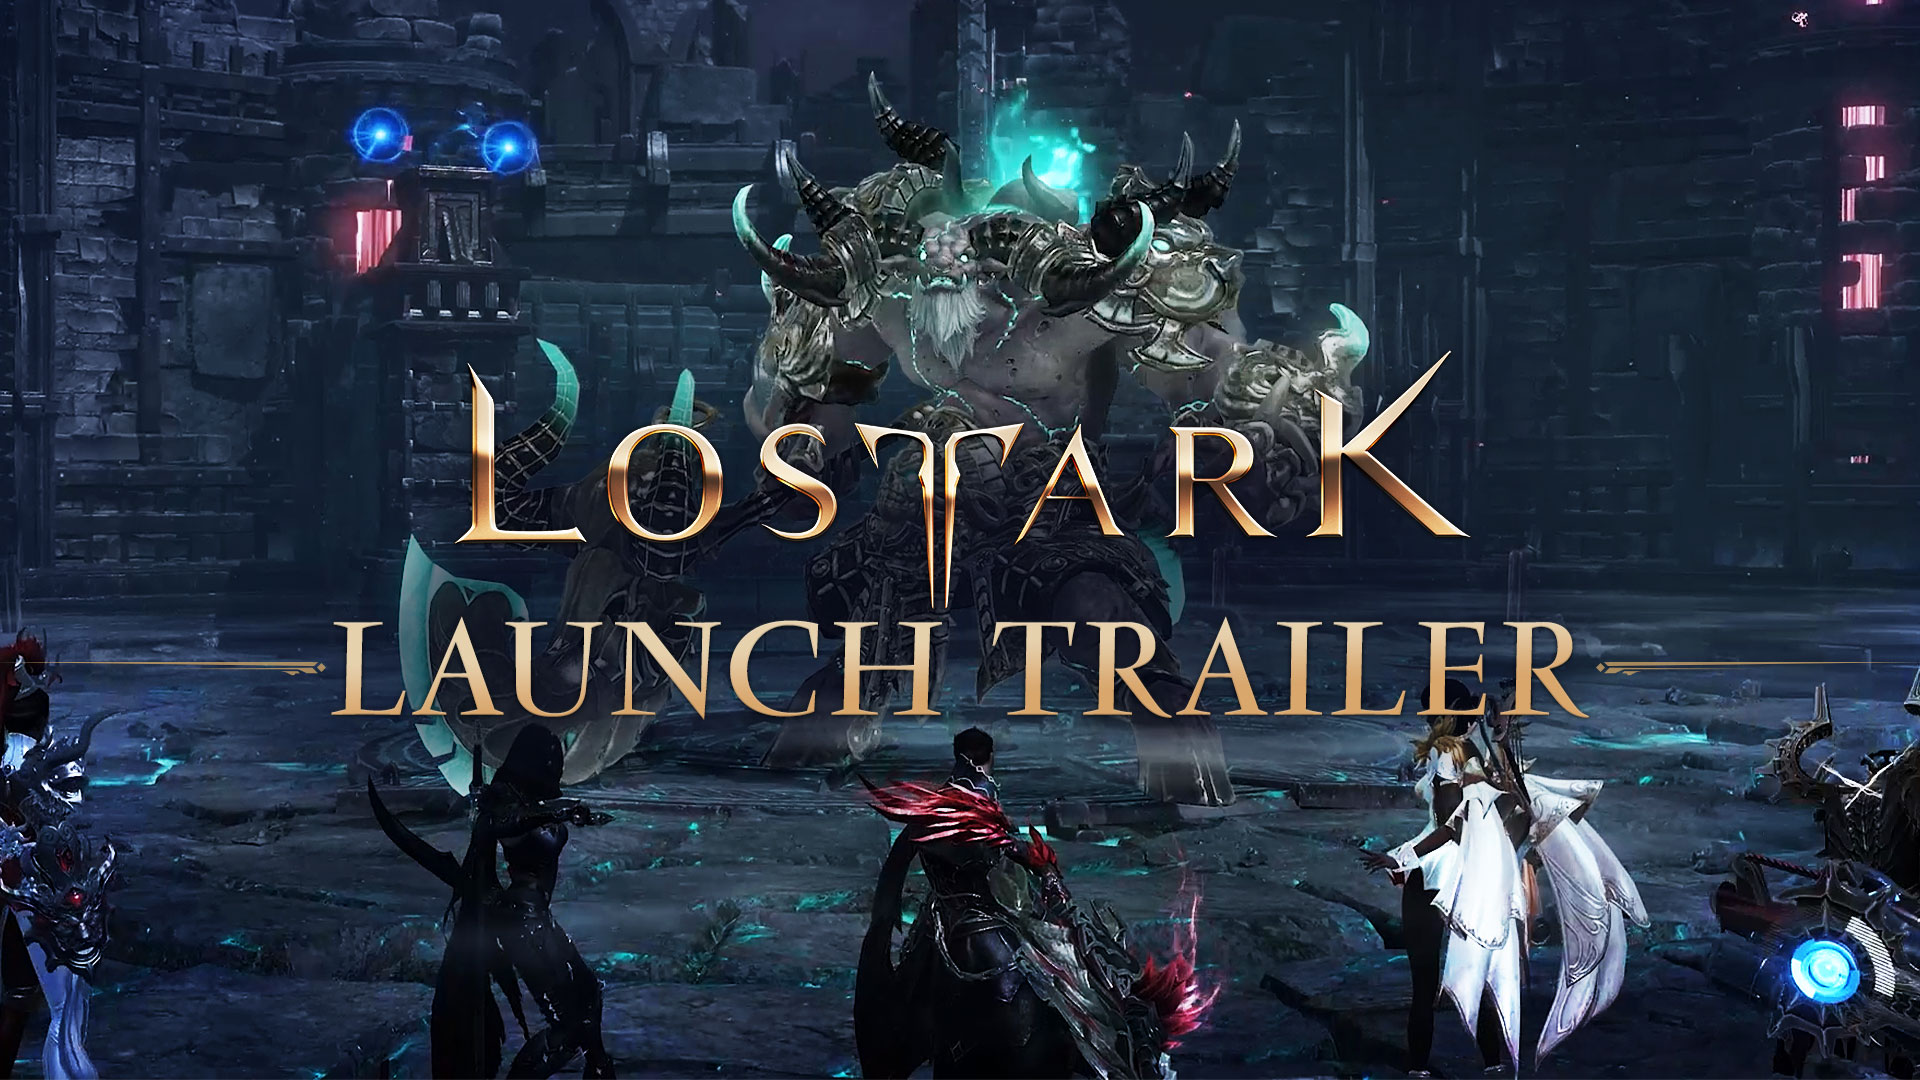 December Prime Gaming Loot - News  Lost Ark - Free to Play MMO Action RPG